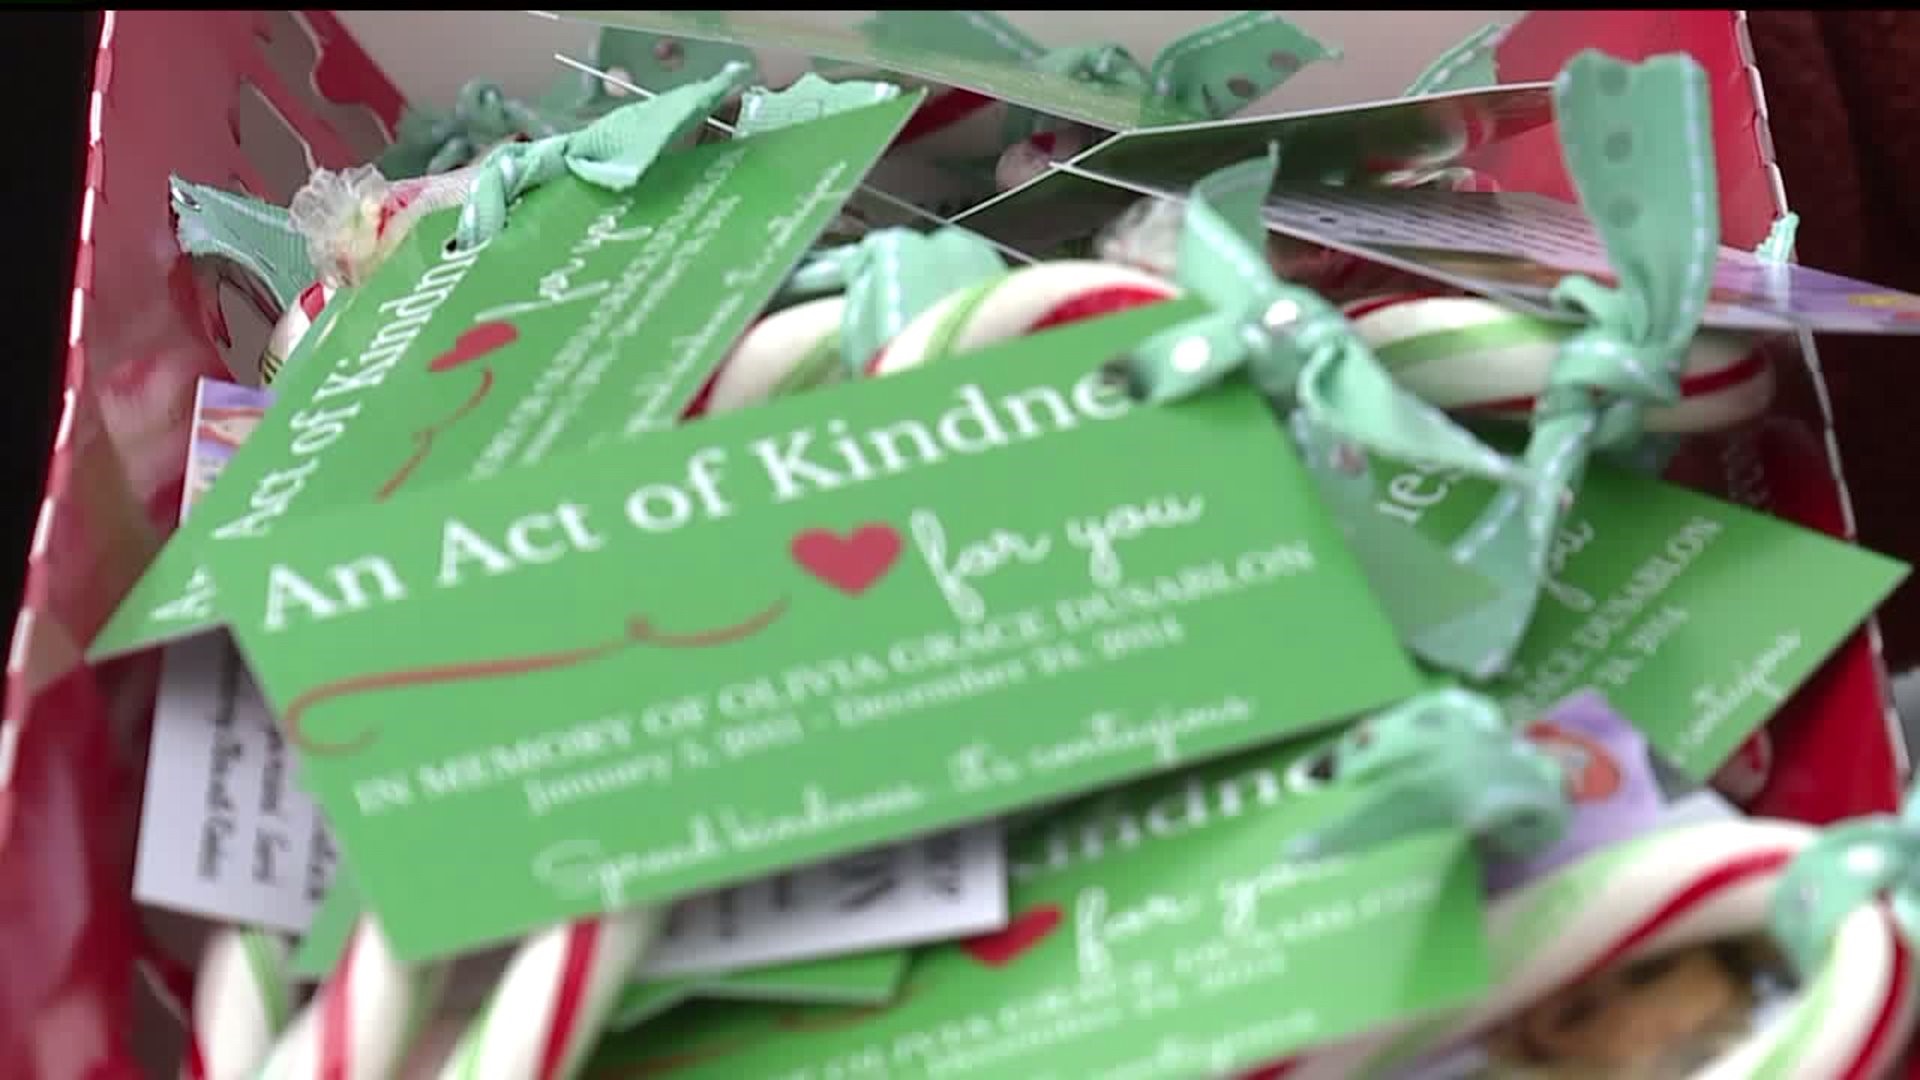 Family shares thousands of `Acts of Kindness` cards in honor of little girl who passed away